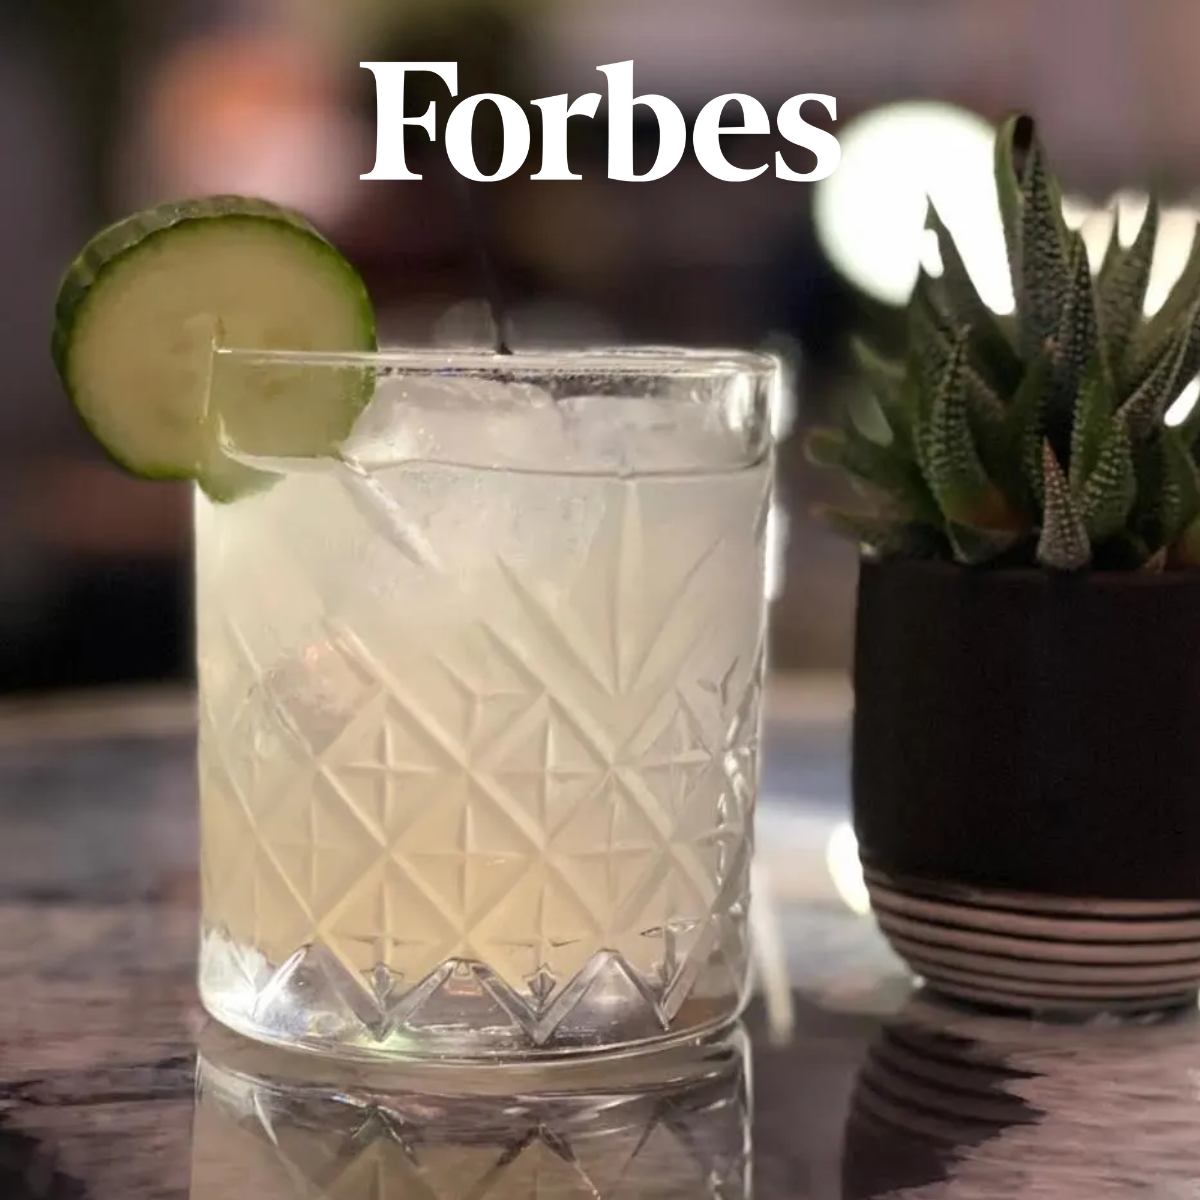 FORBES - 20 Delicious Cocktails To Enjoy On National Tequila Day